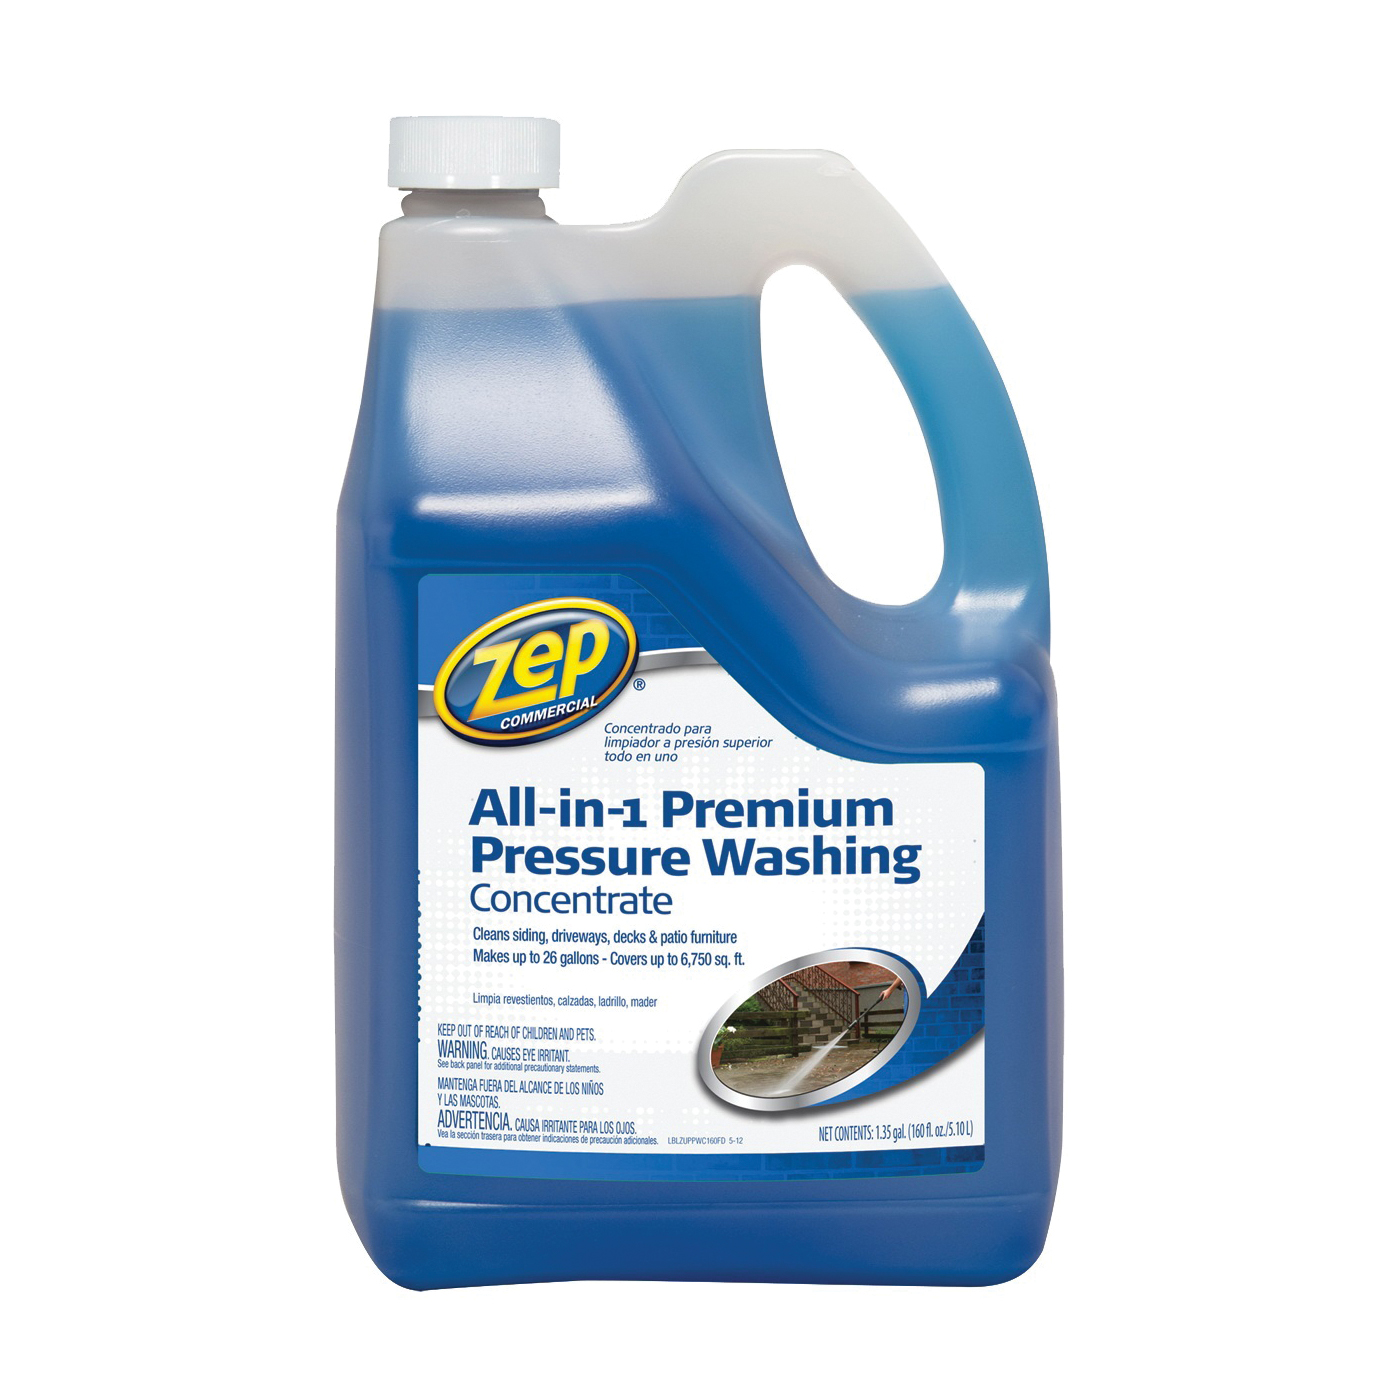 Zep ZUPPWC160 Pressure Washer Concentrate, Liquid, Characteristic, 1.35 gal - 1